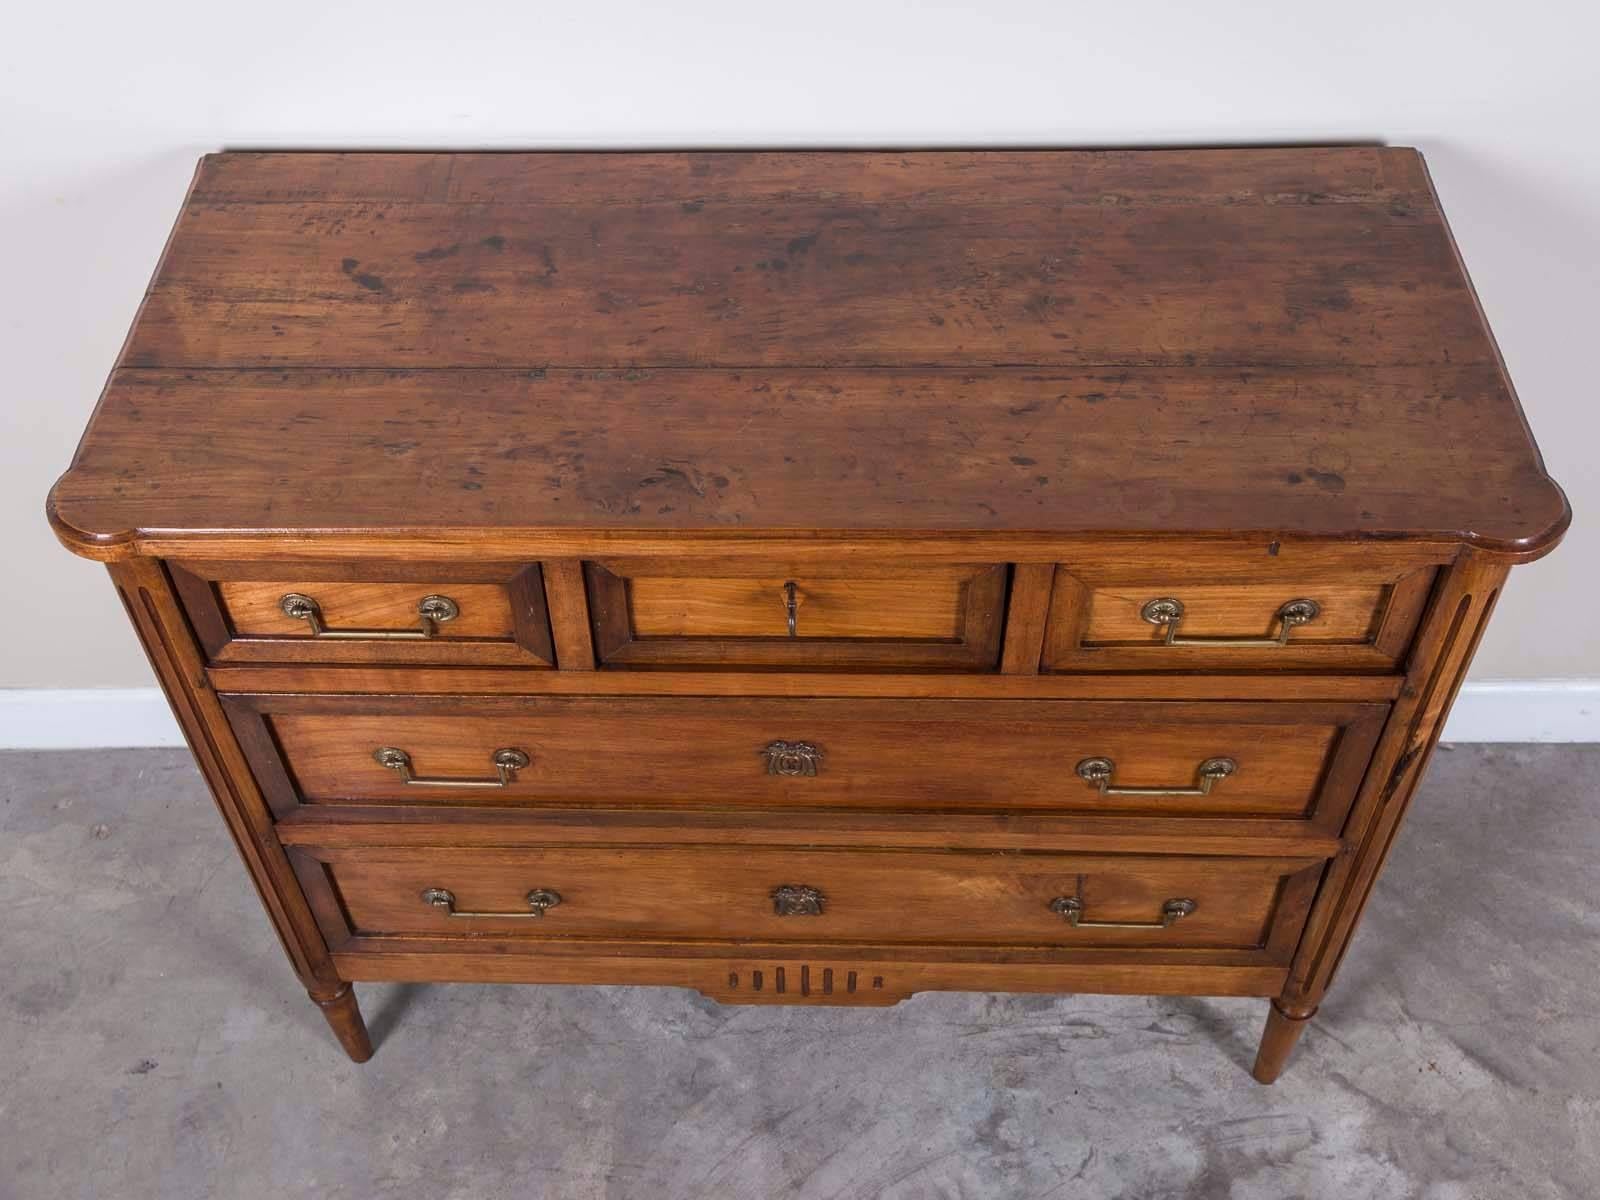 The gorgeous honey caramel color on this antique French Louis XVI walnut chest of drawers circa 1790 is an absolute pleasure to behold. Polished to a lustrous patina this French walnut chest has three drawers at the top with two lower wider drawers